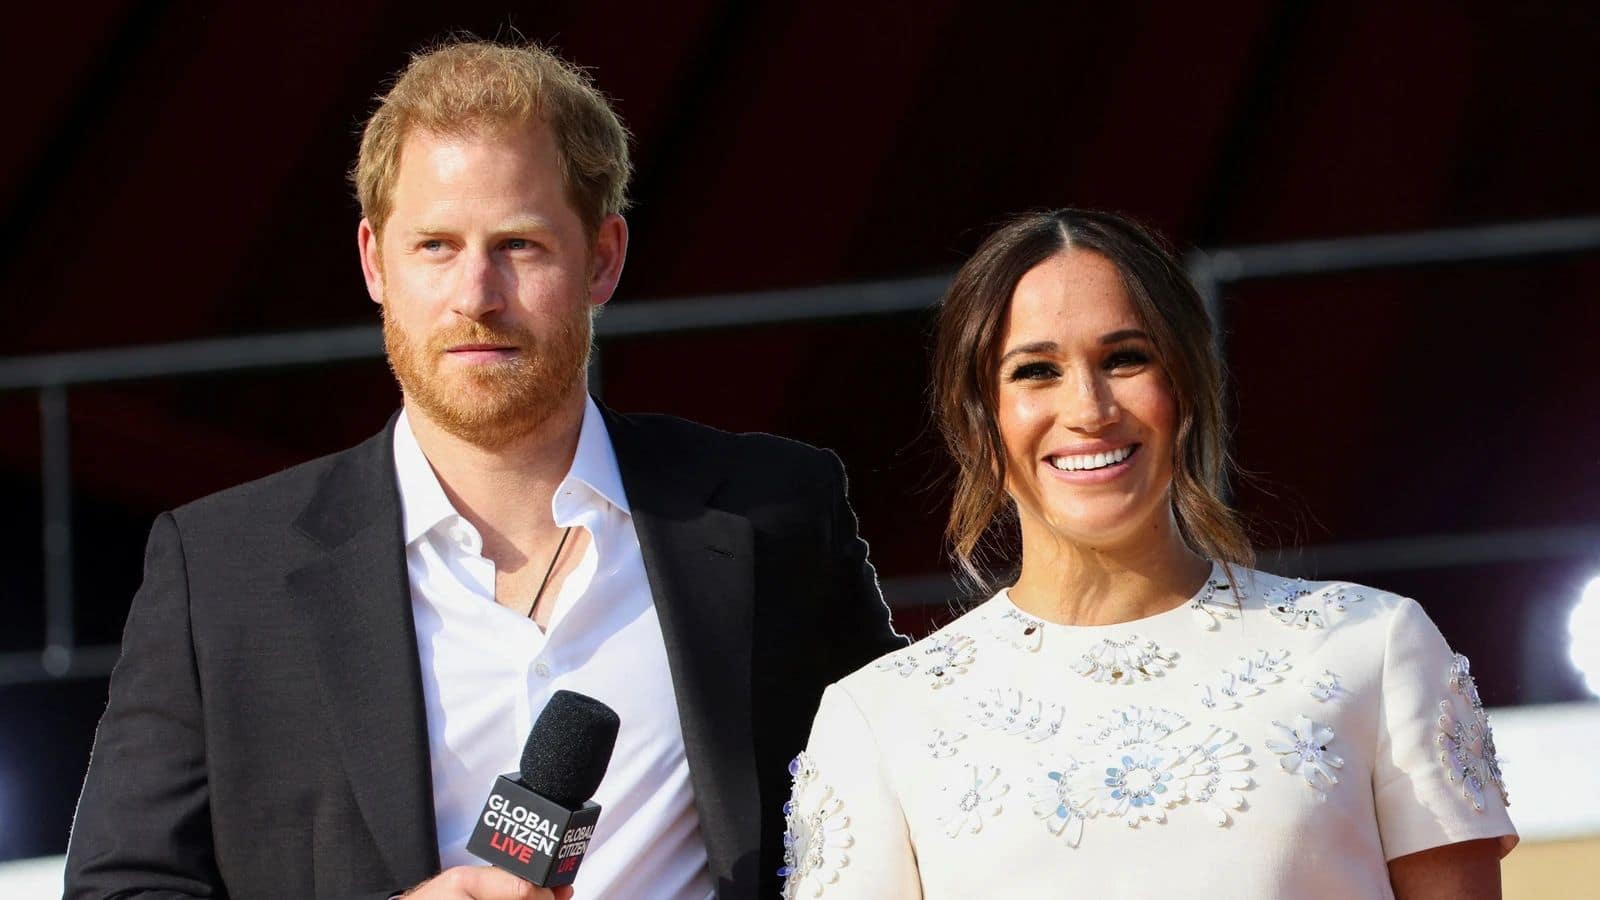 Prince Harry and Meghan Markle venture into reality TV